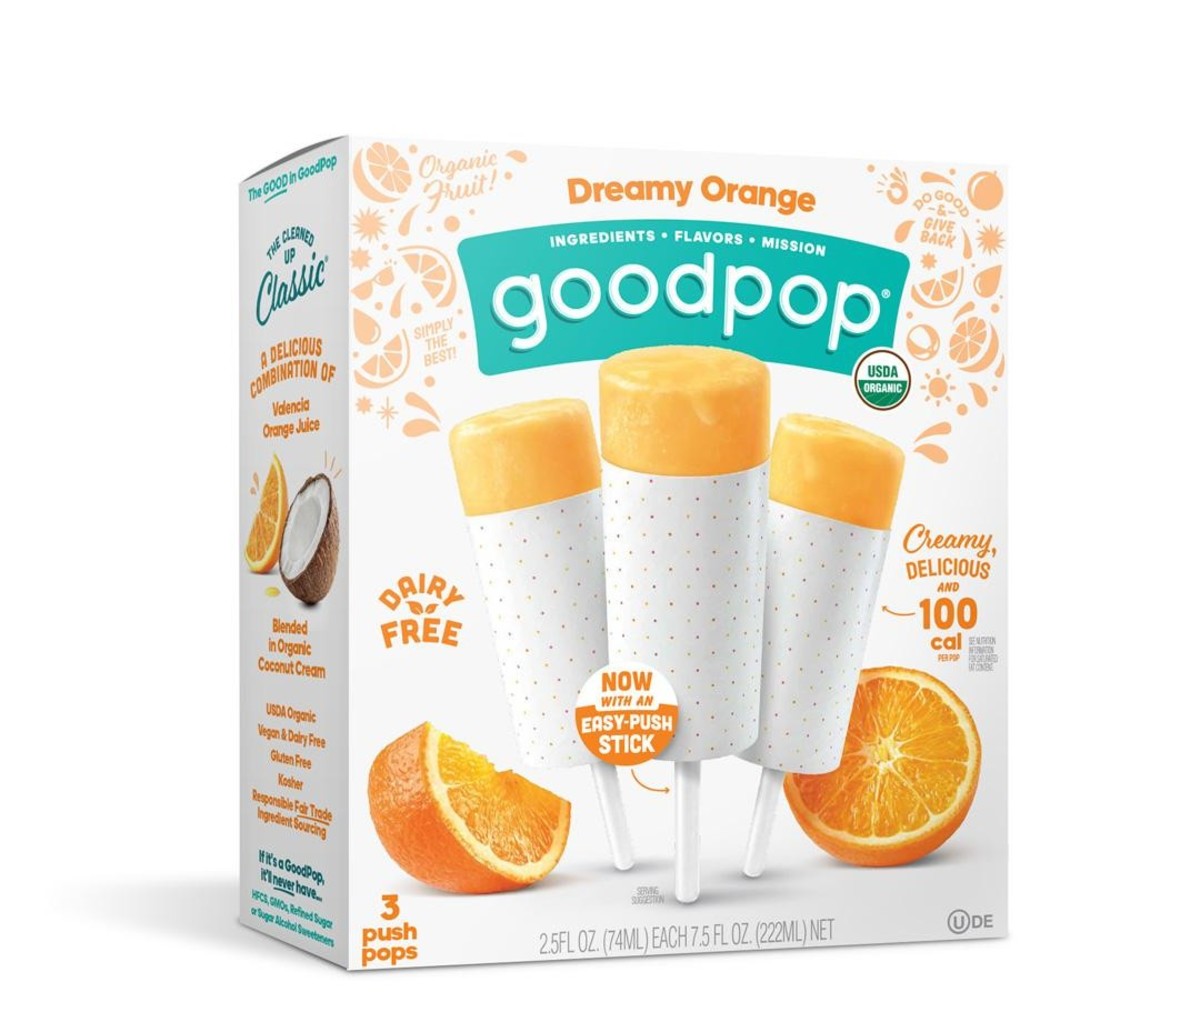 GoodPop makes it possible to enjoy a delicious summer frozen treat and feel GOOD about it. They don't compromise on ingredients or flavor and their pops utilize clean, plant-based, organic and responsibly sourced ingredients. Ditching artificial sugars, flavors, dyes, dairy, HFCS, and GMOs shouldn’t mean missing out on a refreshing summer treat.